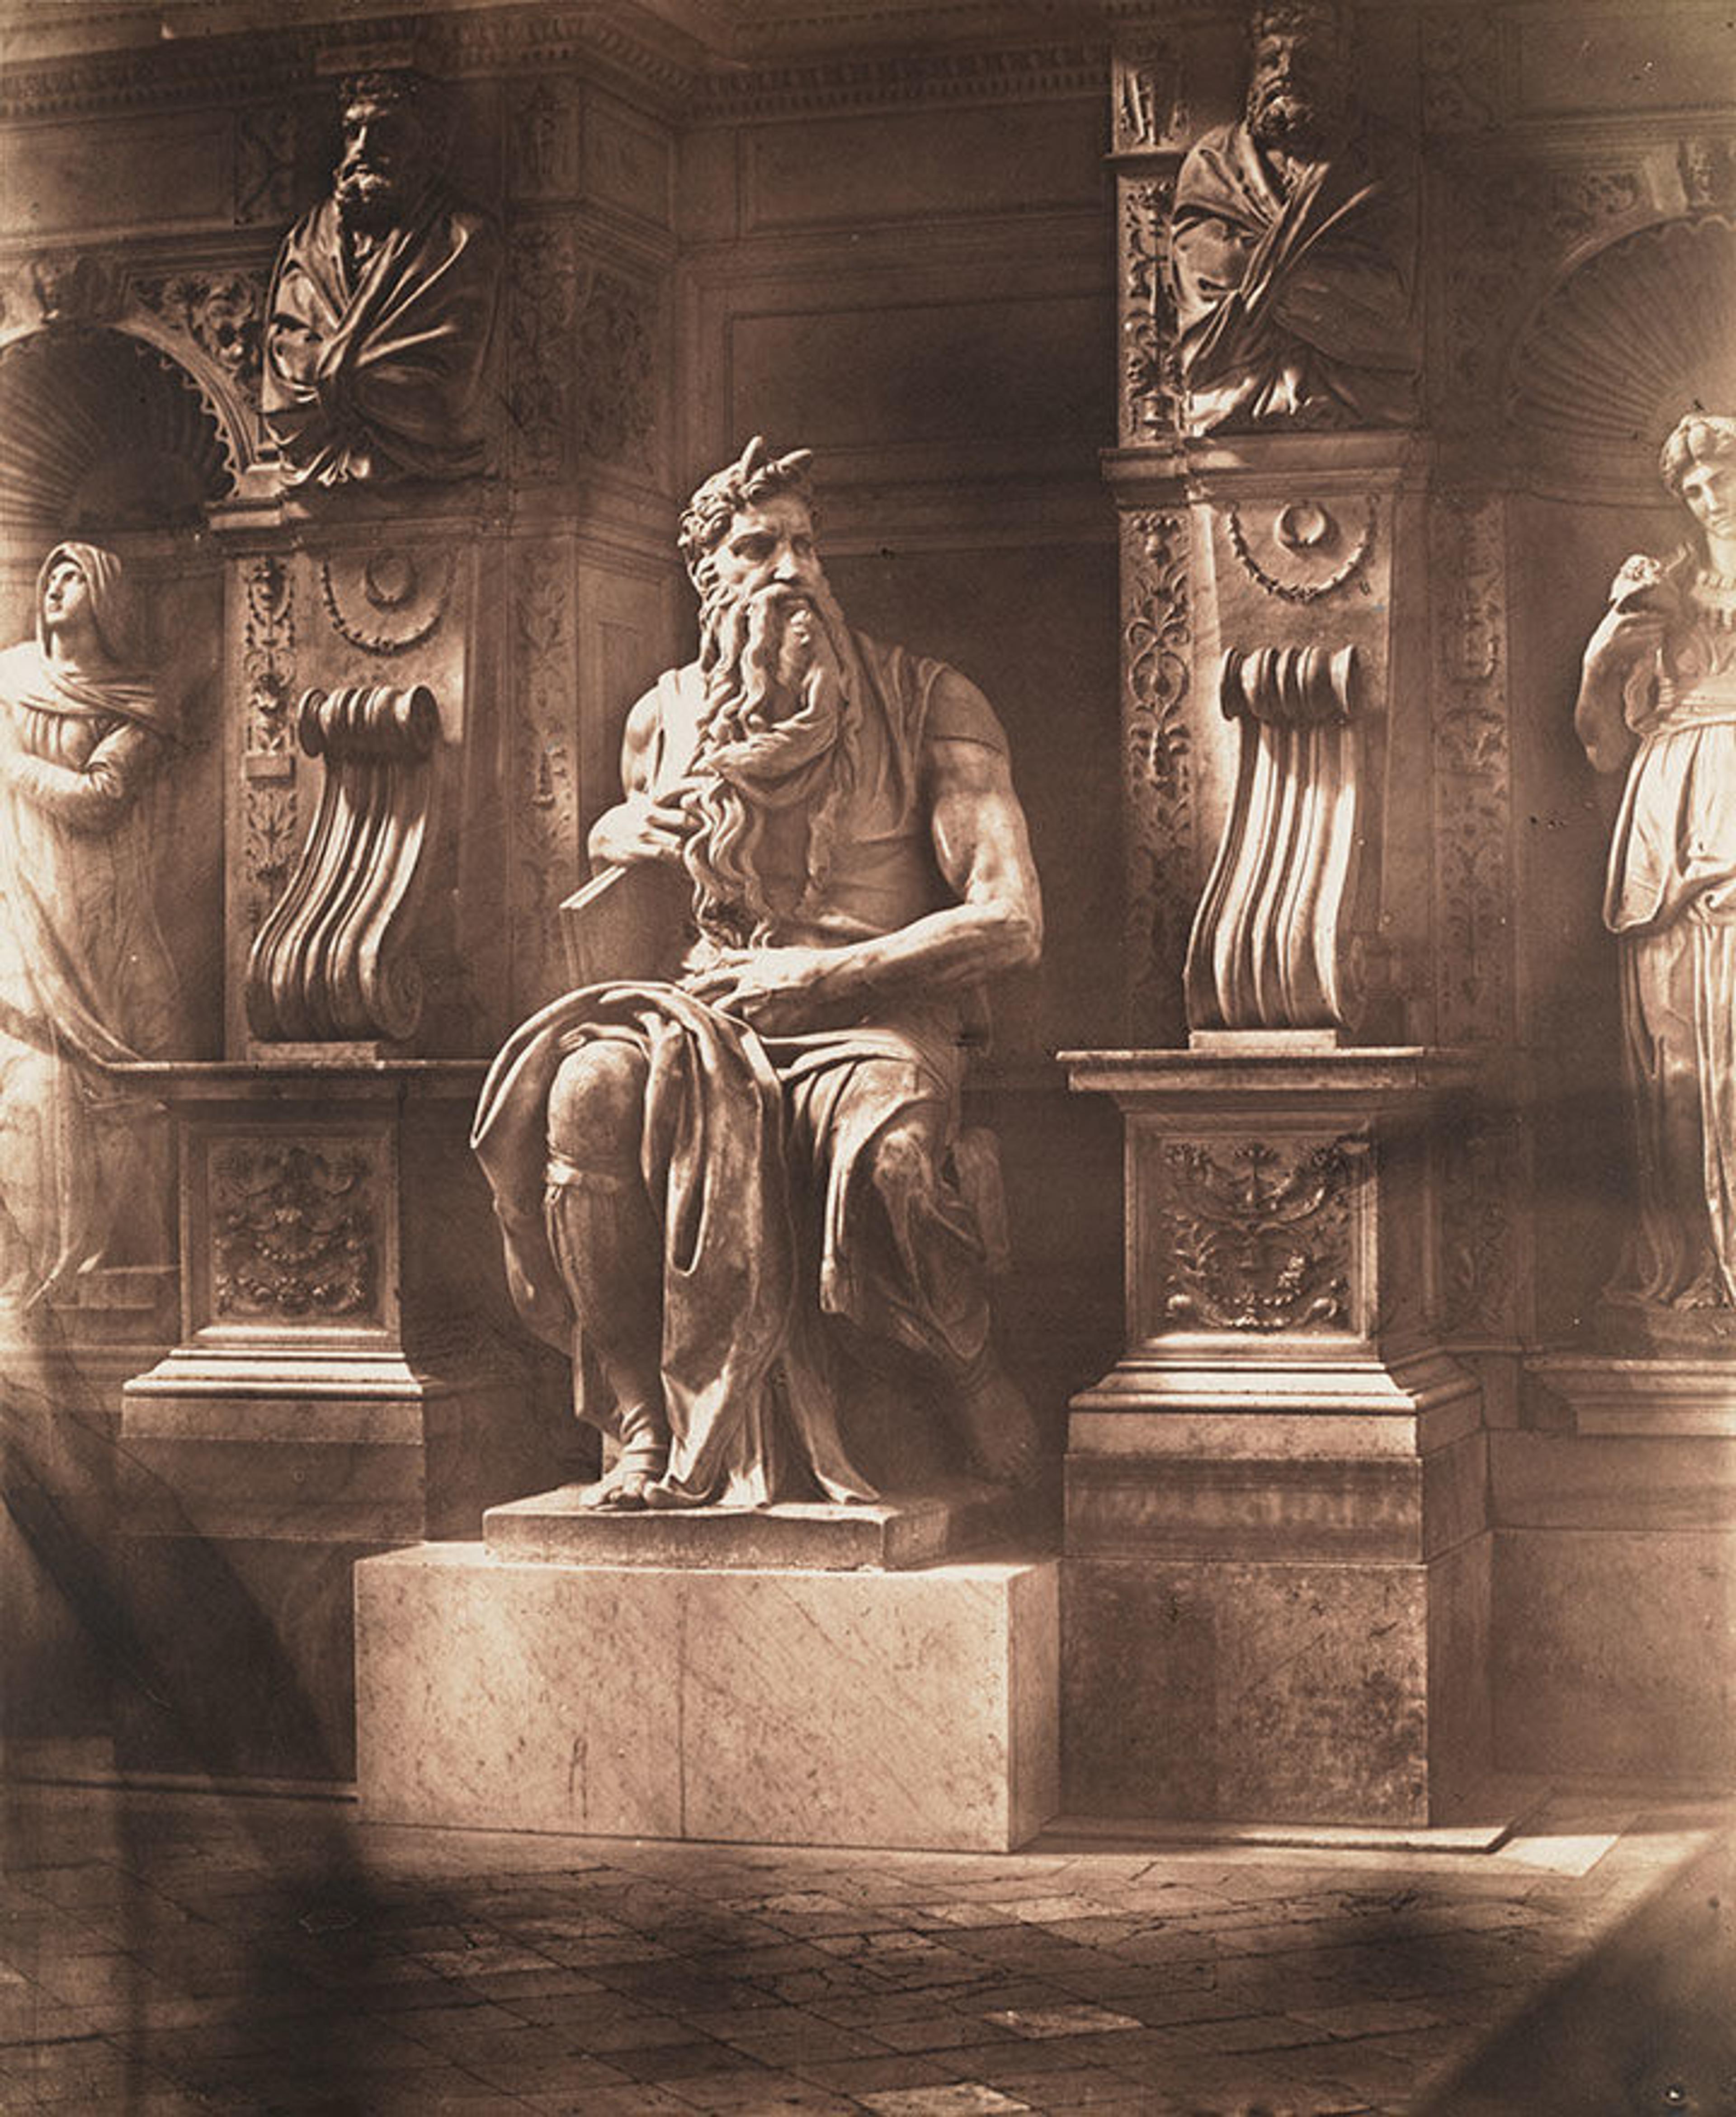 A photograph of a Classical sculpture of Moses by James Anderson